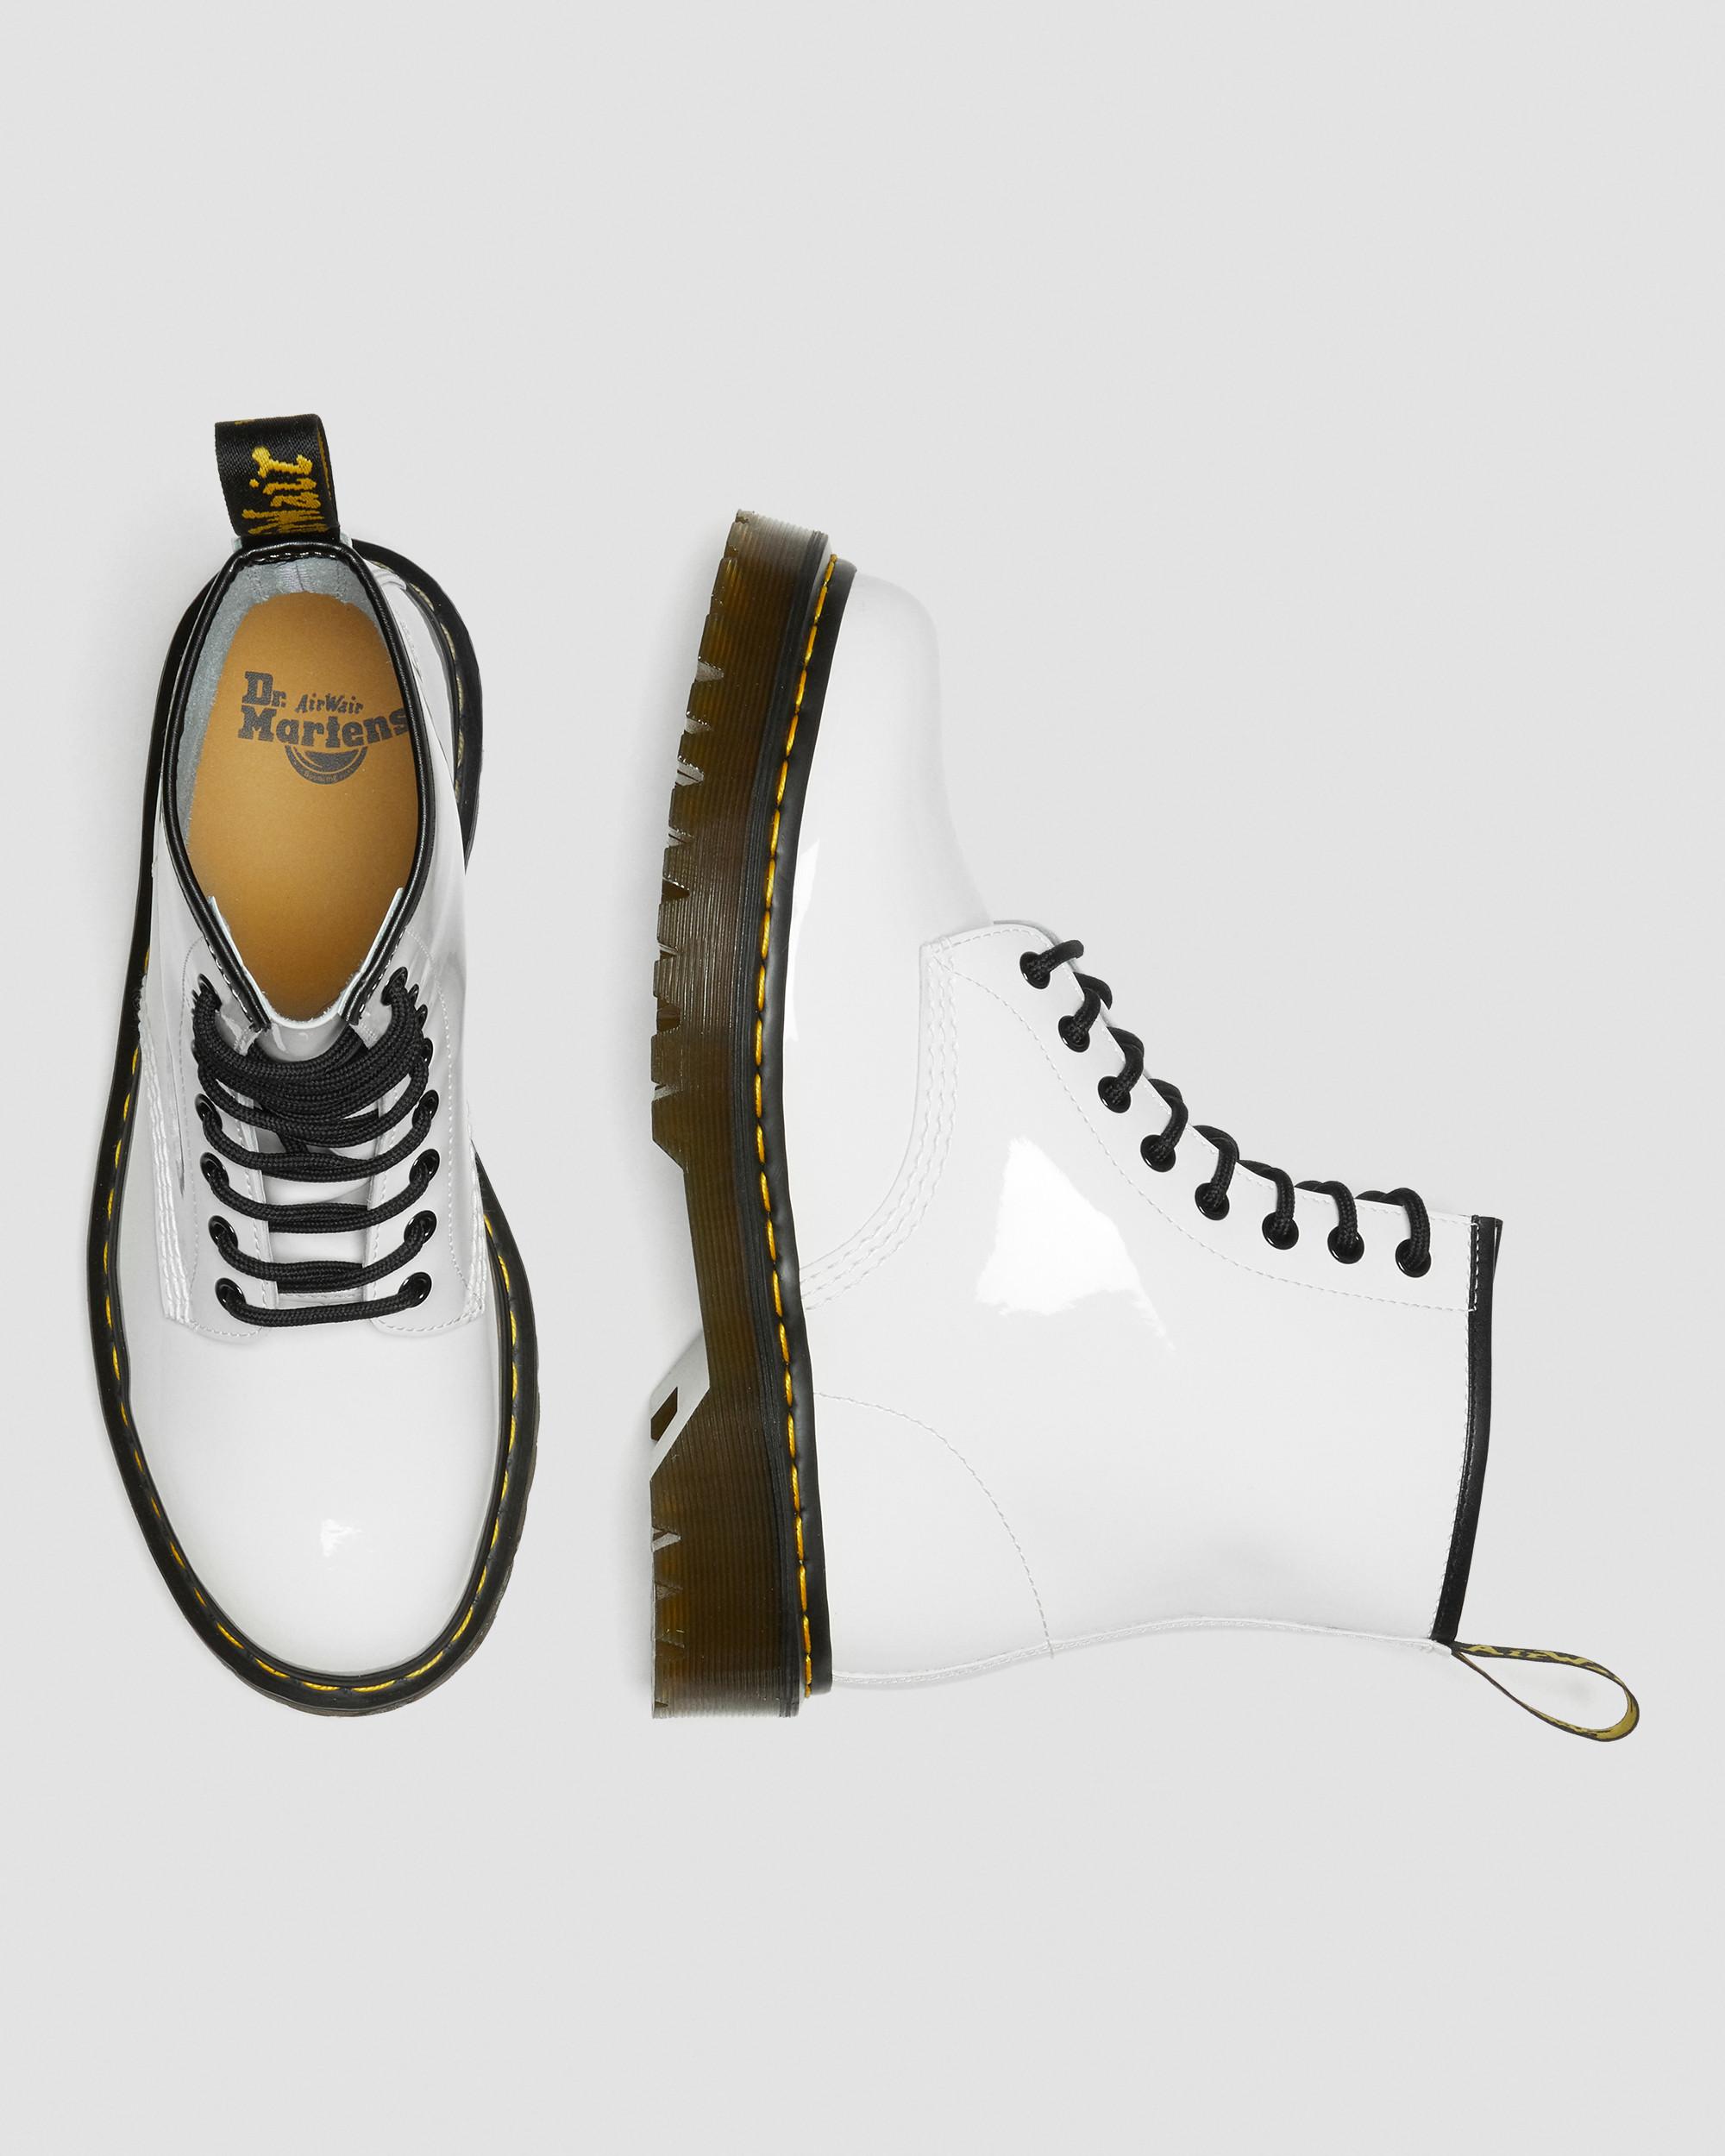 1460 Bex Patent Leather Lace Up Boots, White | Dr. Martens